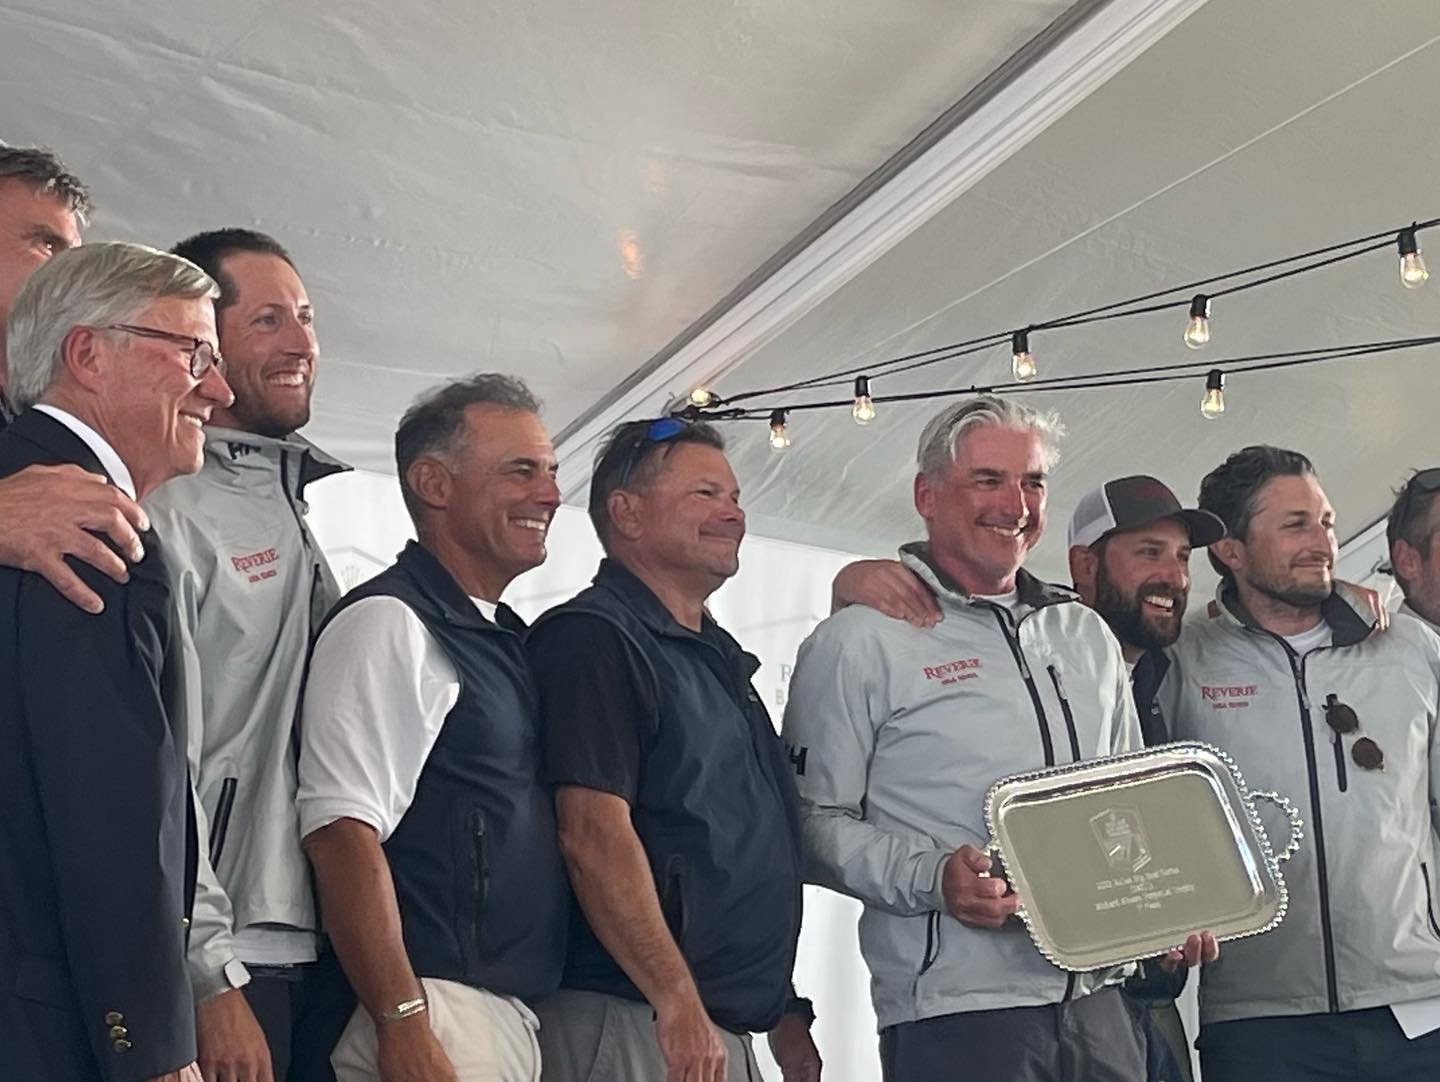 It was a good day! Thank you @bigboatseries @stfyc and our AMAZING crew for an awesome regatta! #bigboatseries #sfbaysailing #jboatracing #j109 #regatta